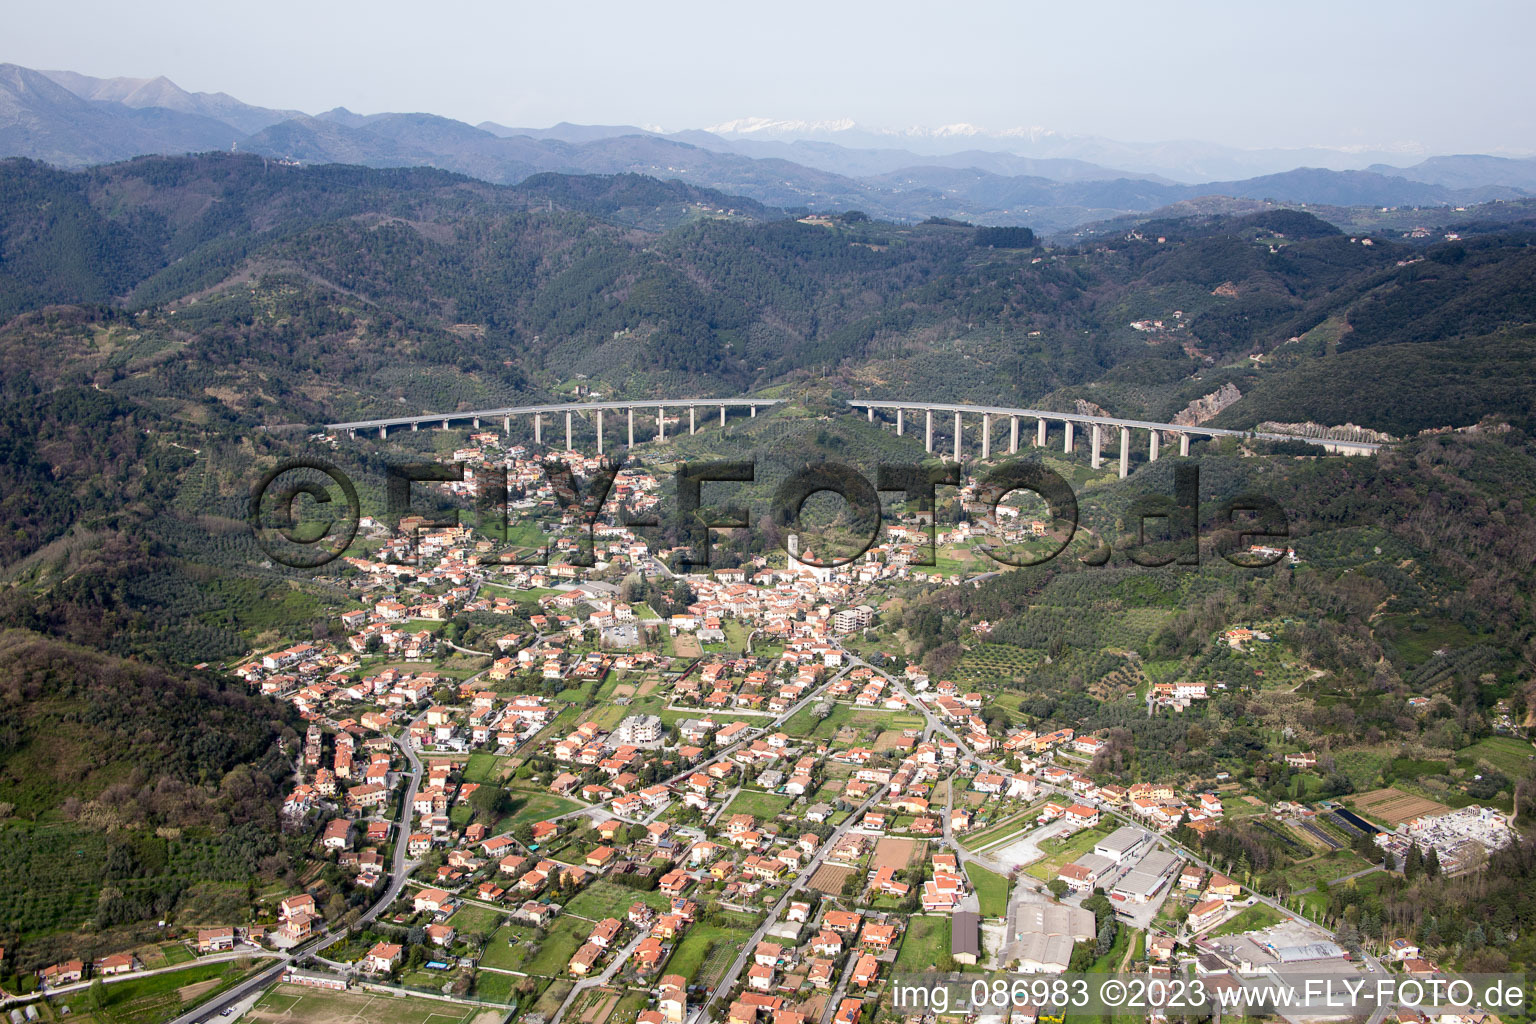 Aerial photograpy of Massarosa in the state Tuscany, Italy